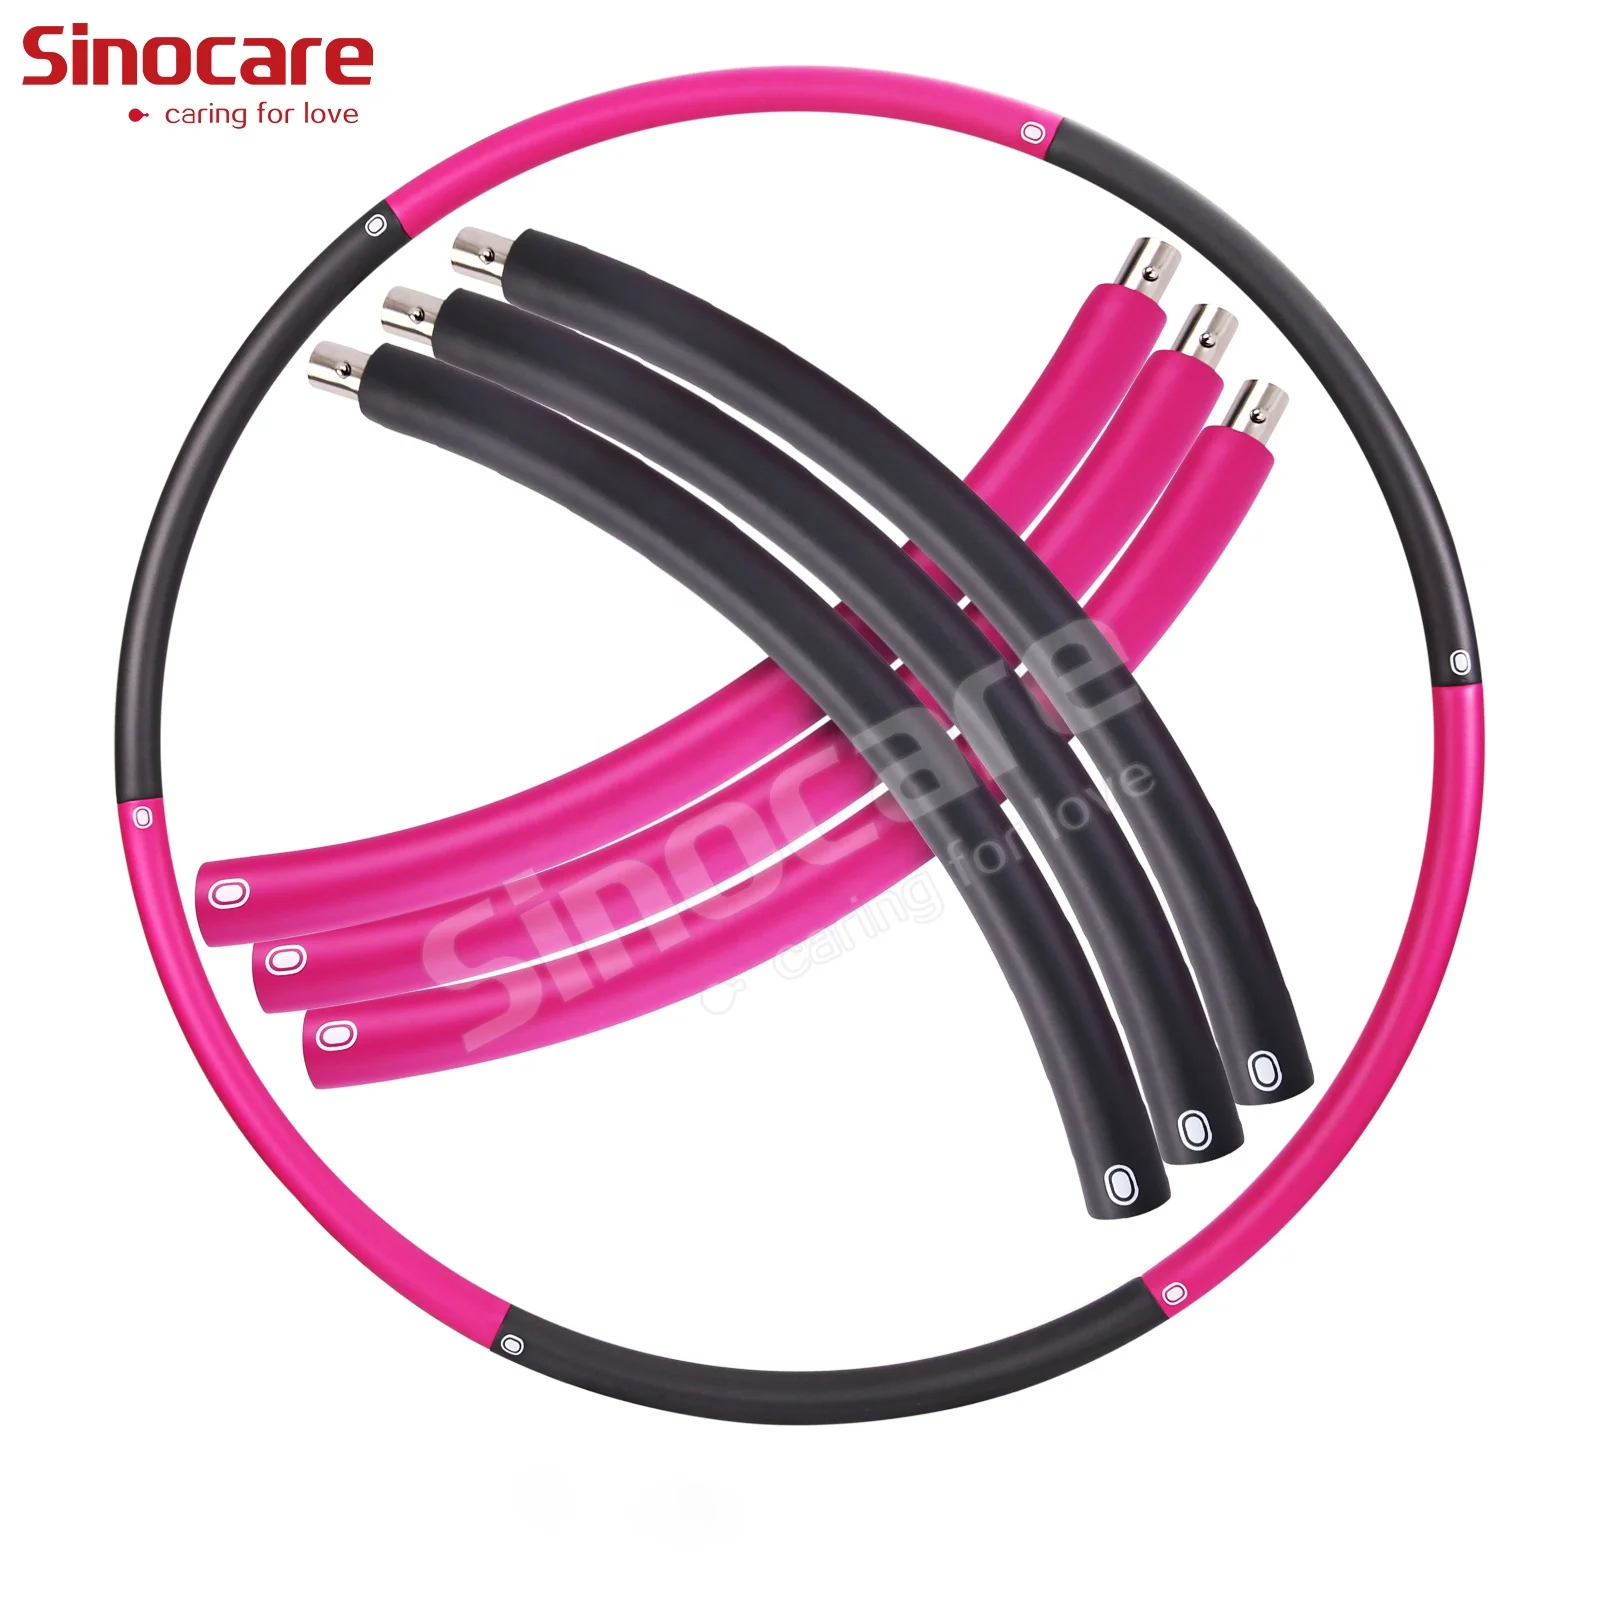 Sinocare Hula Ring Hoop 6 Section Pink Hula Ring Hoop Detachable Detachable Weighted Hula Ring Hoops Exercise